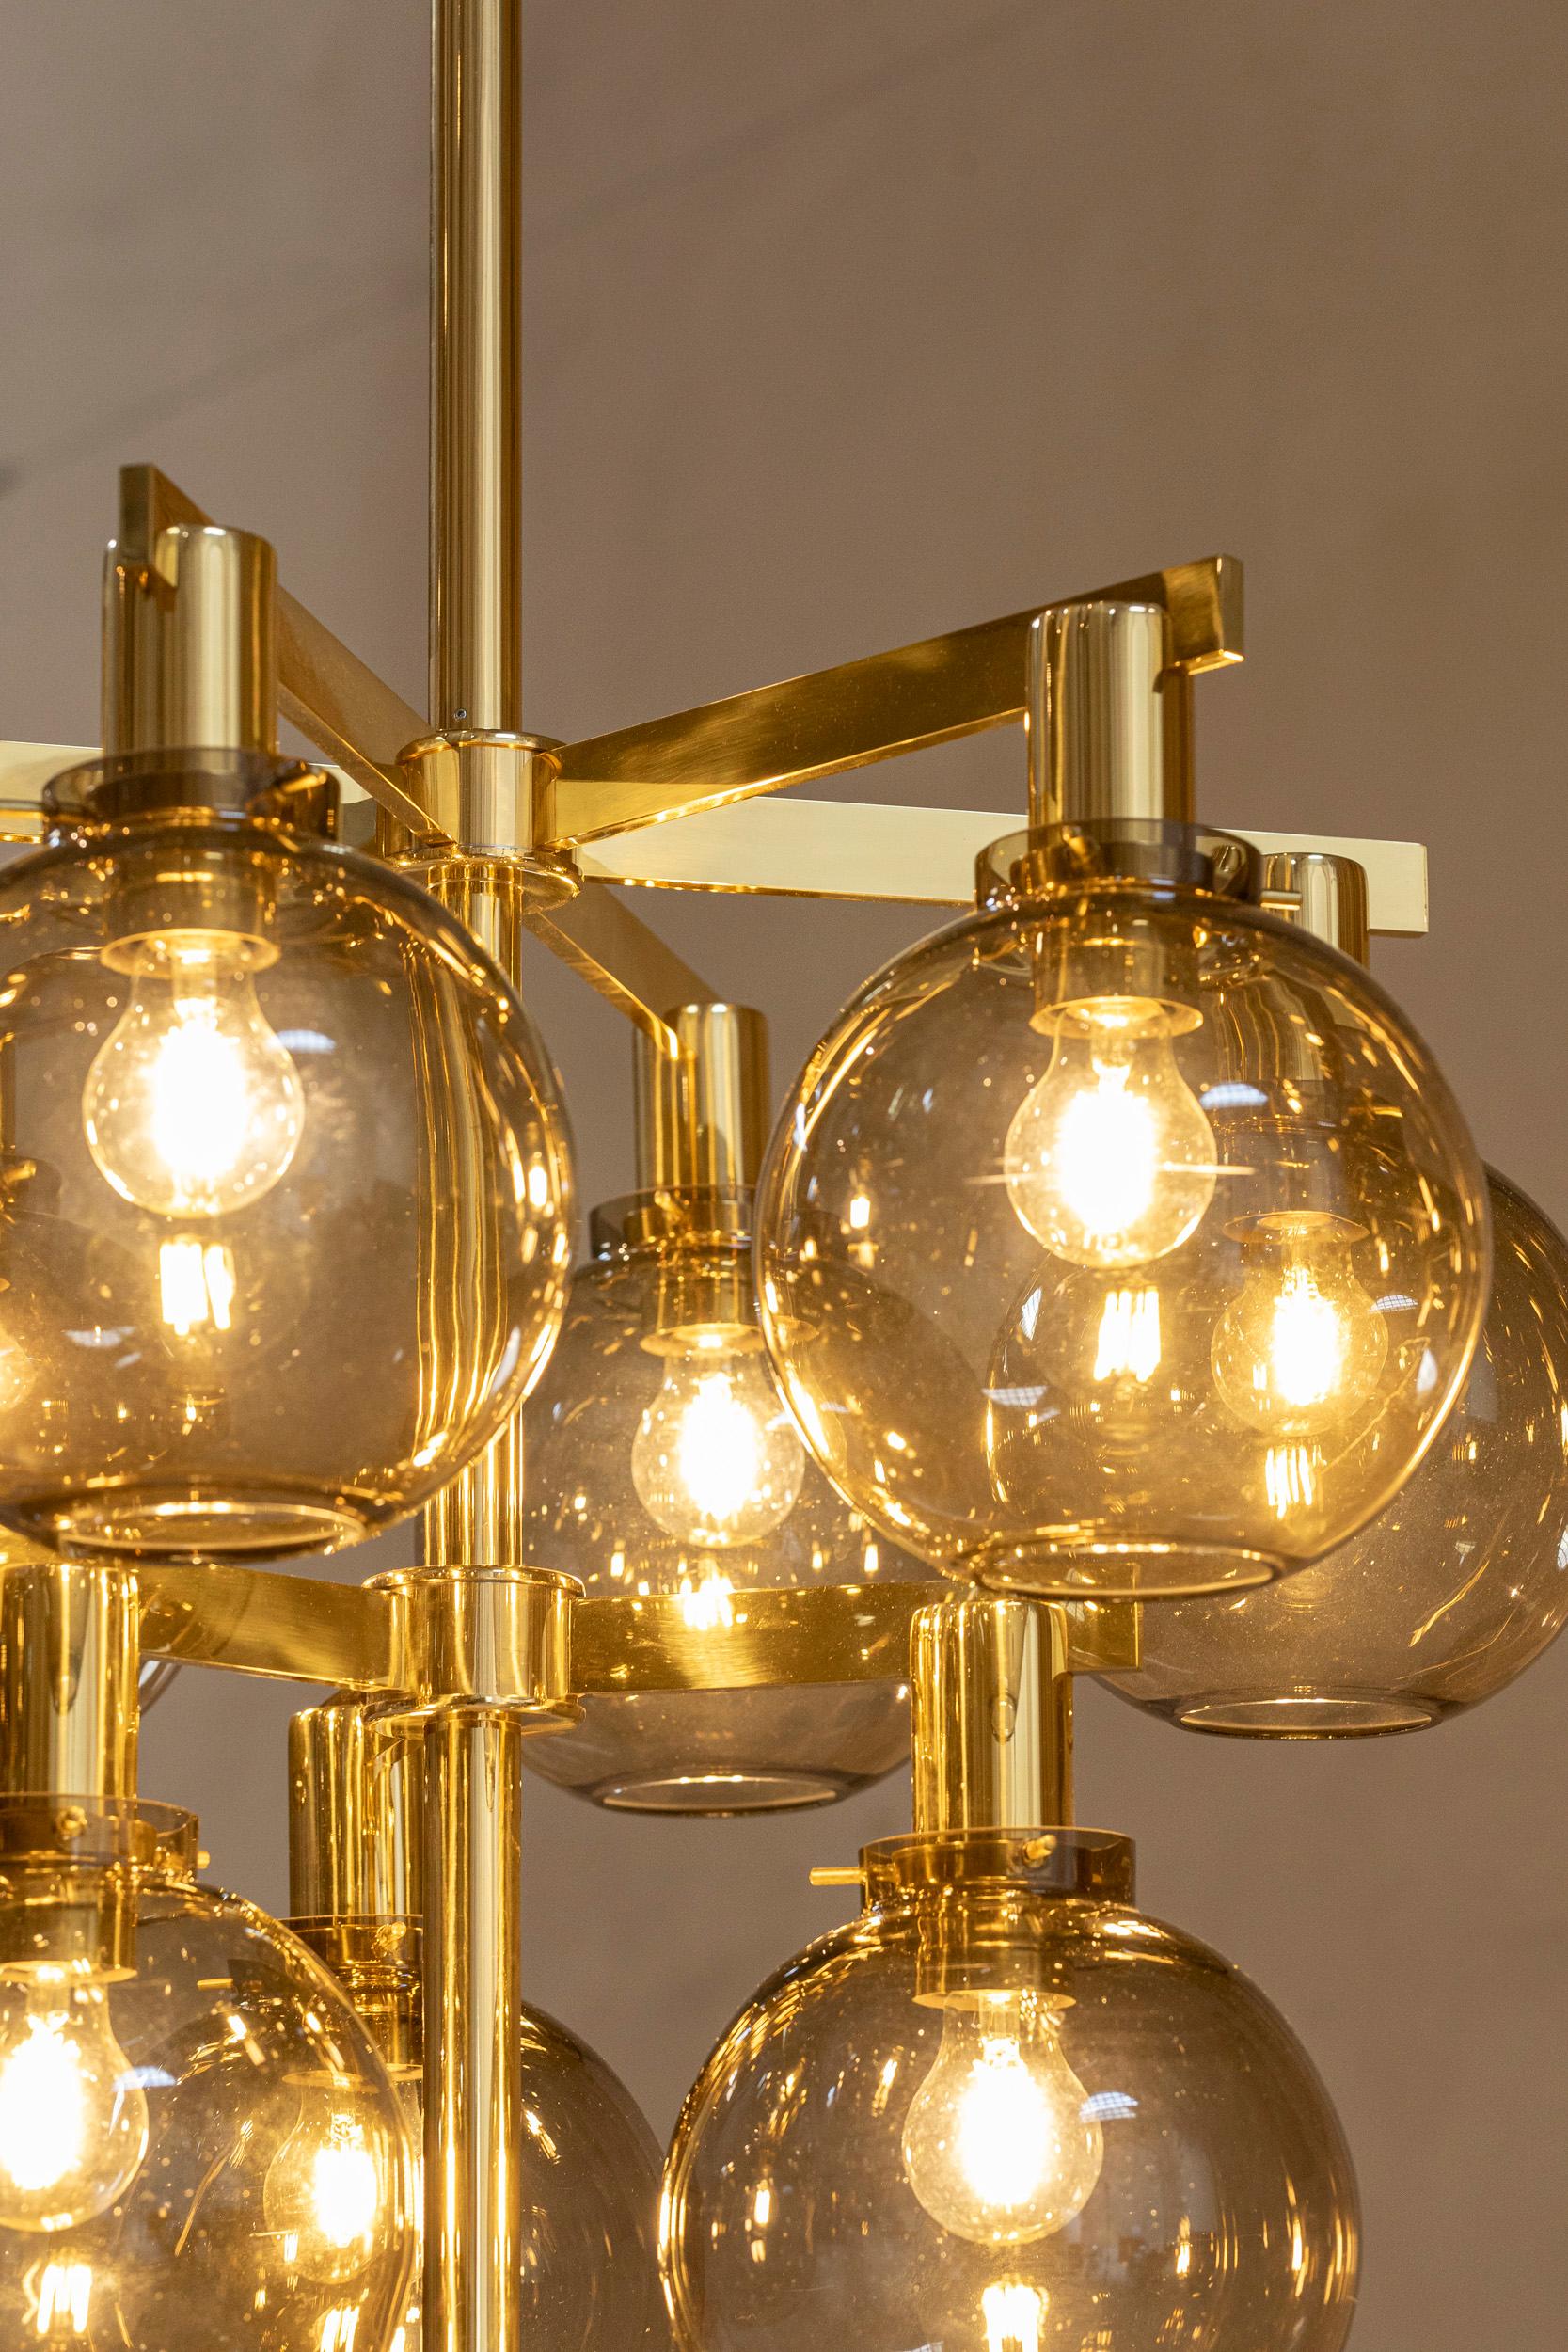 Pair of midcentury chandeliers by Hans-Agne Jakobsson For Sale 7